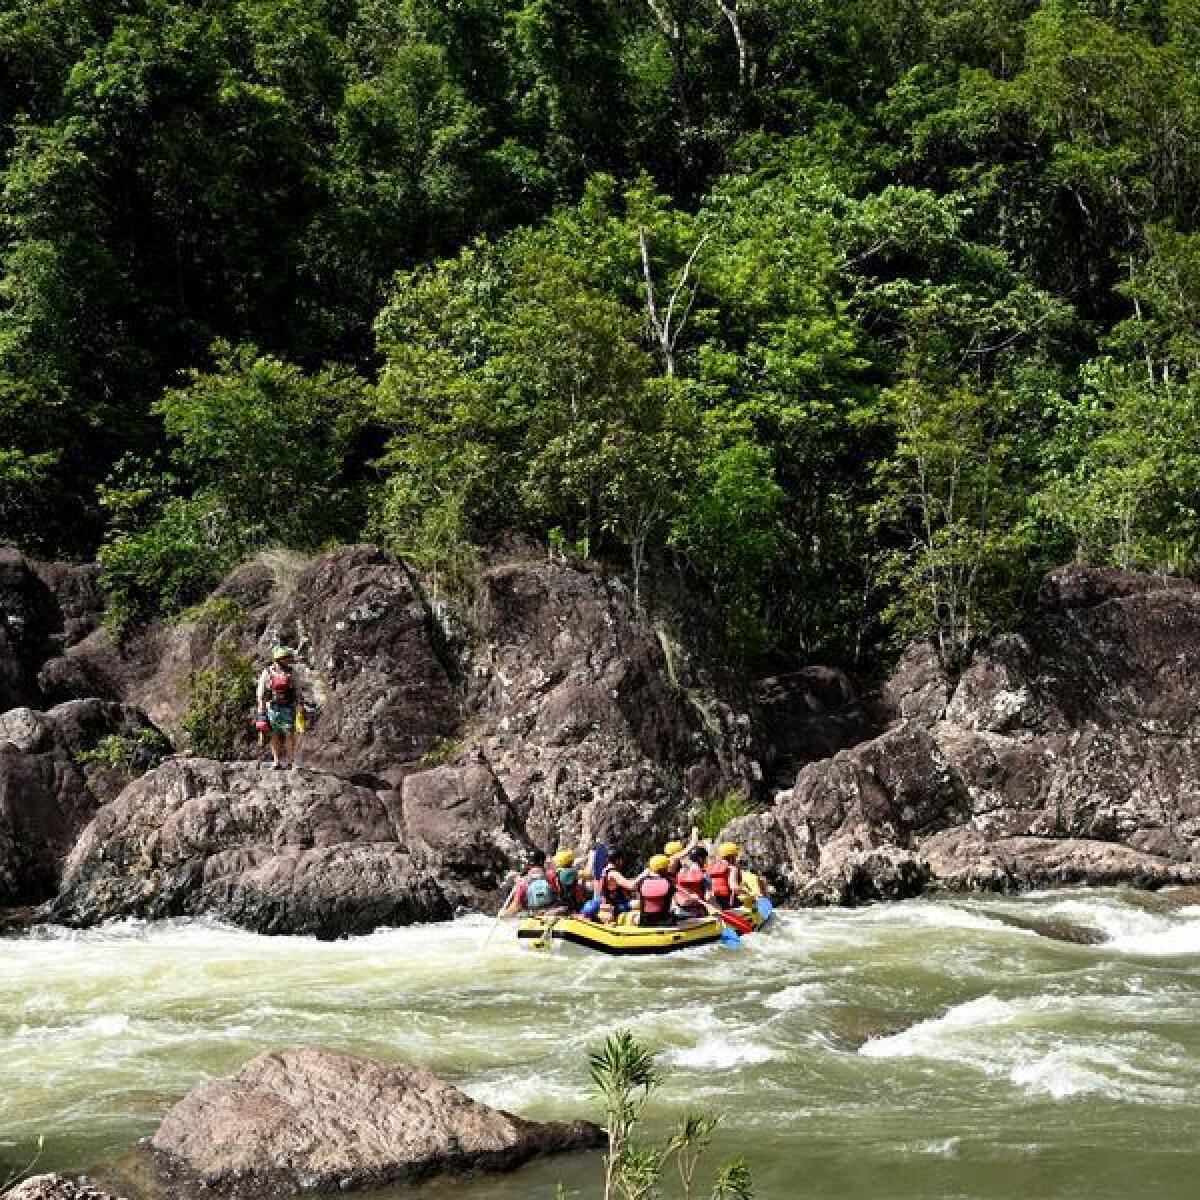 Tourists white water rafting on the Tully River in North Queensland